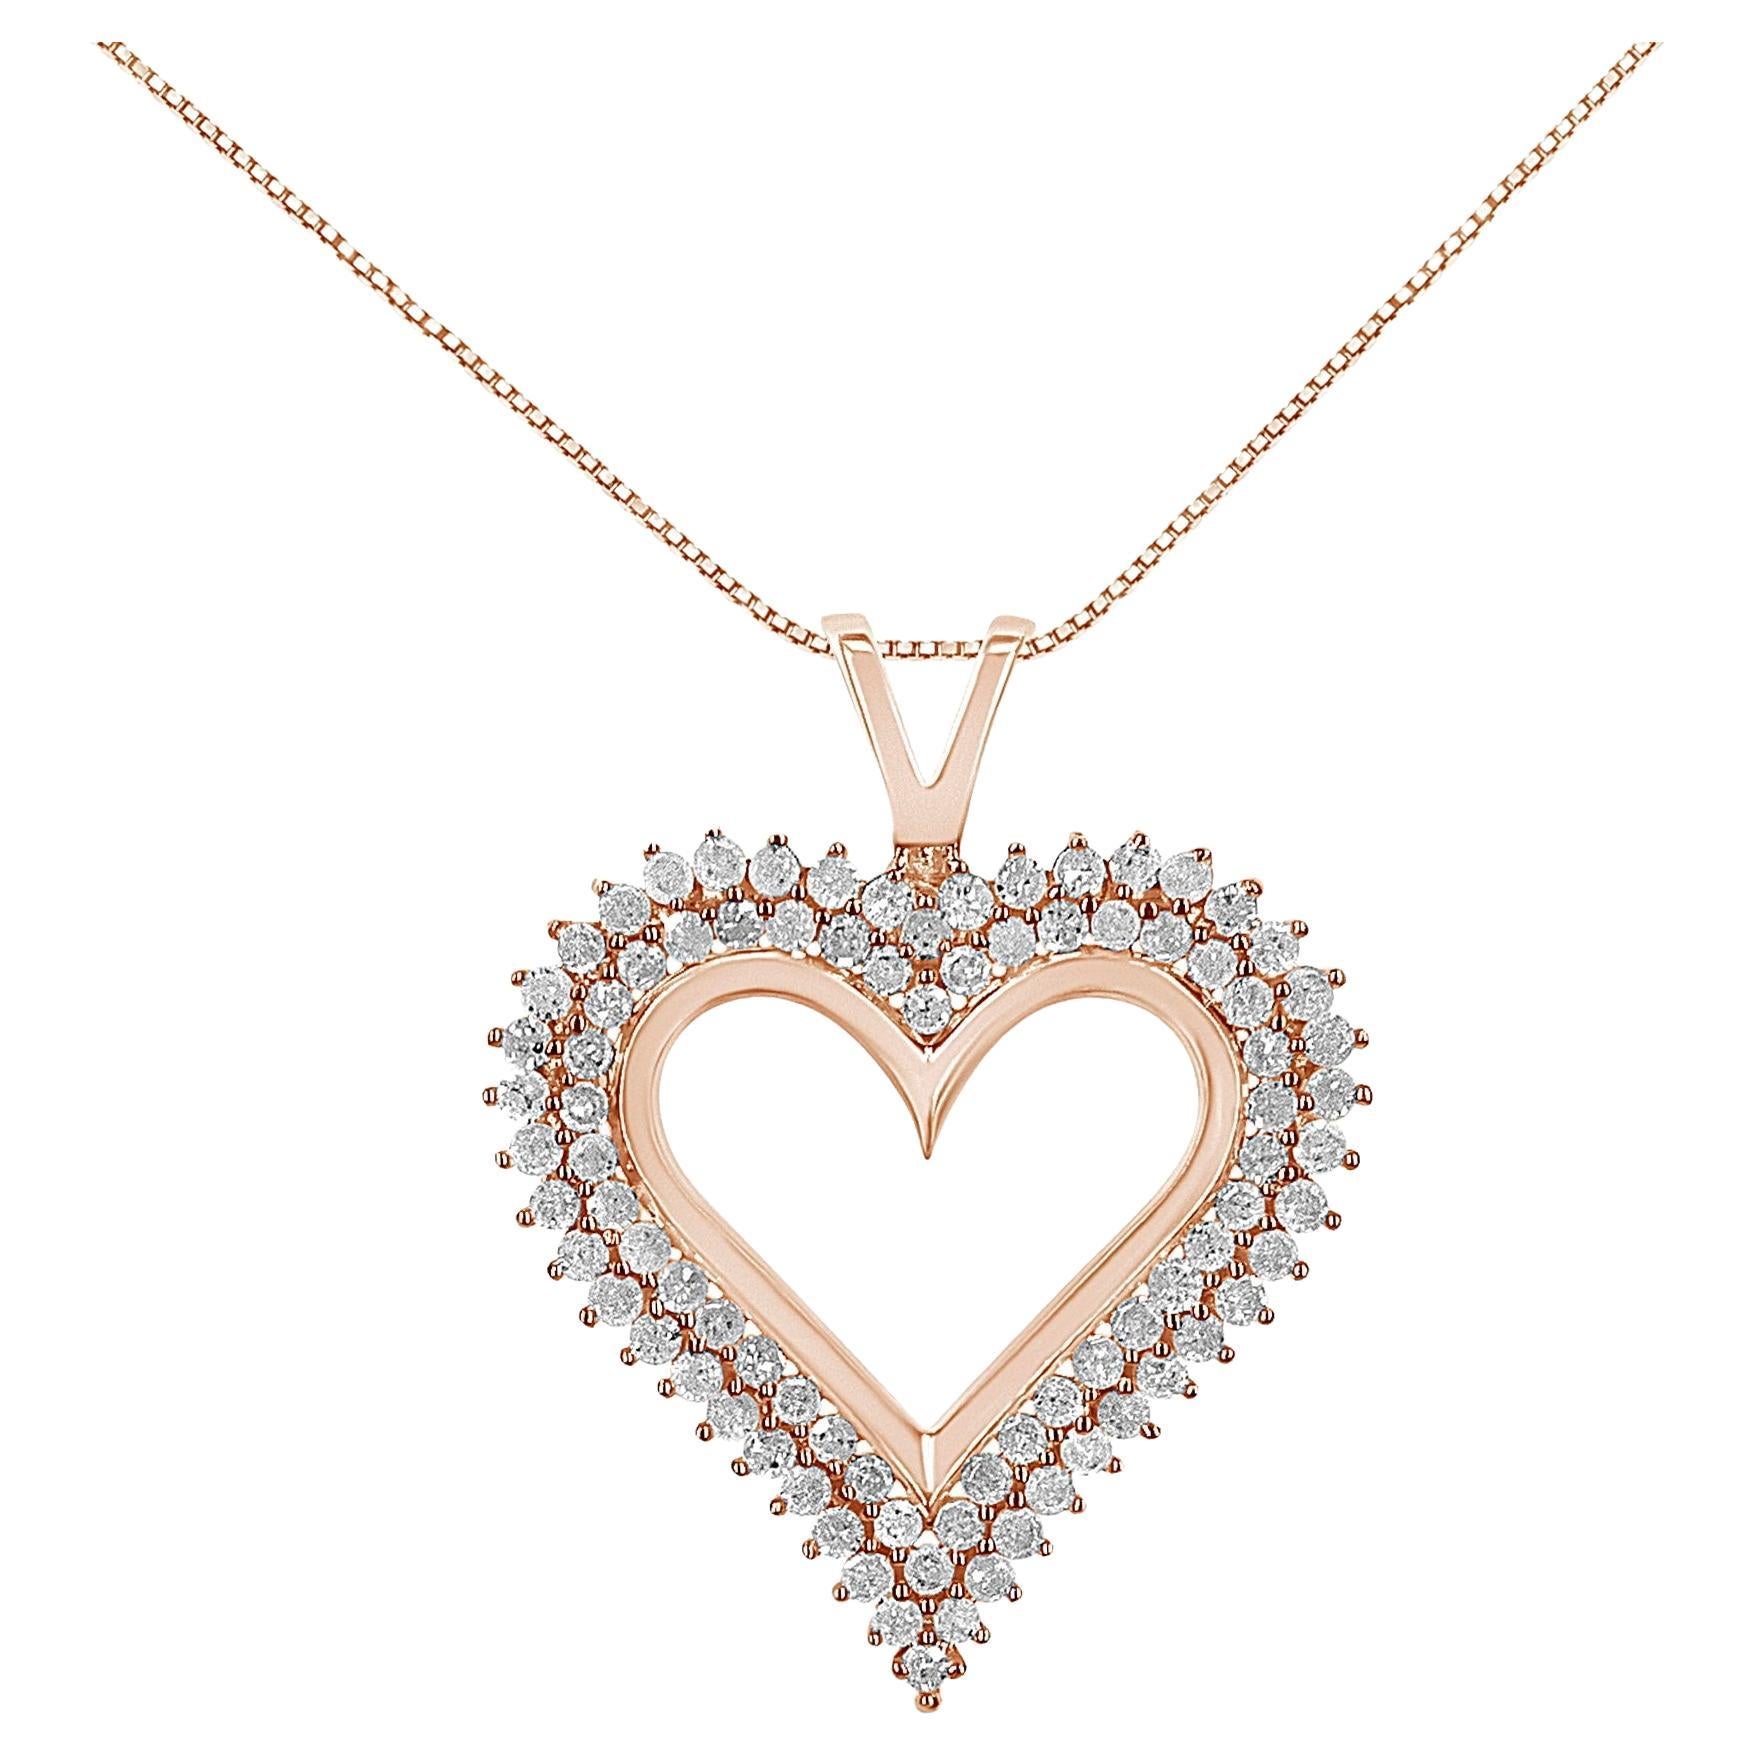 10K Rose Gold Over .925 Sterling Silver 1.0 Cttw Diamond Heart Pendant Necklace